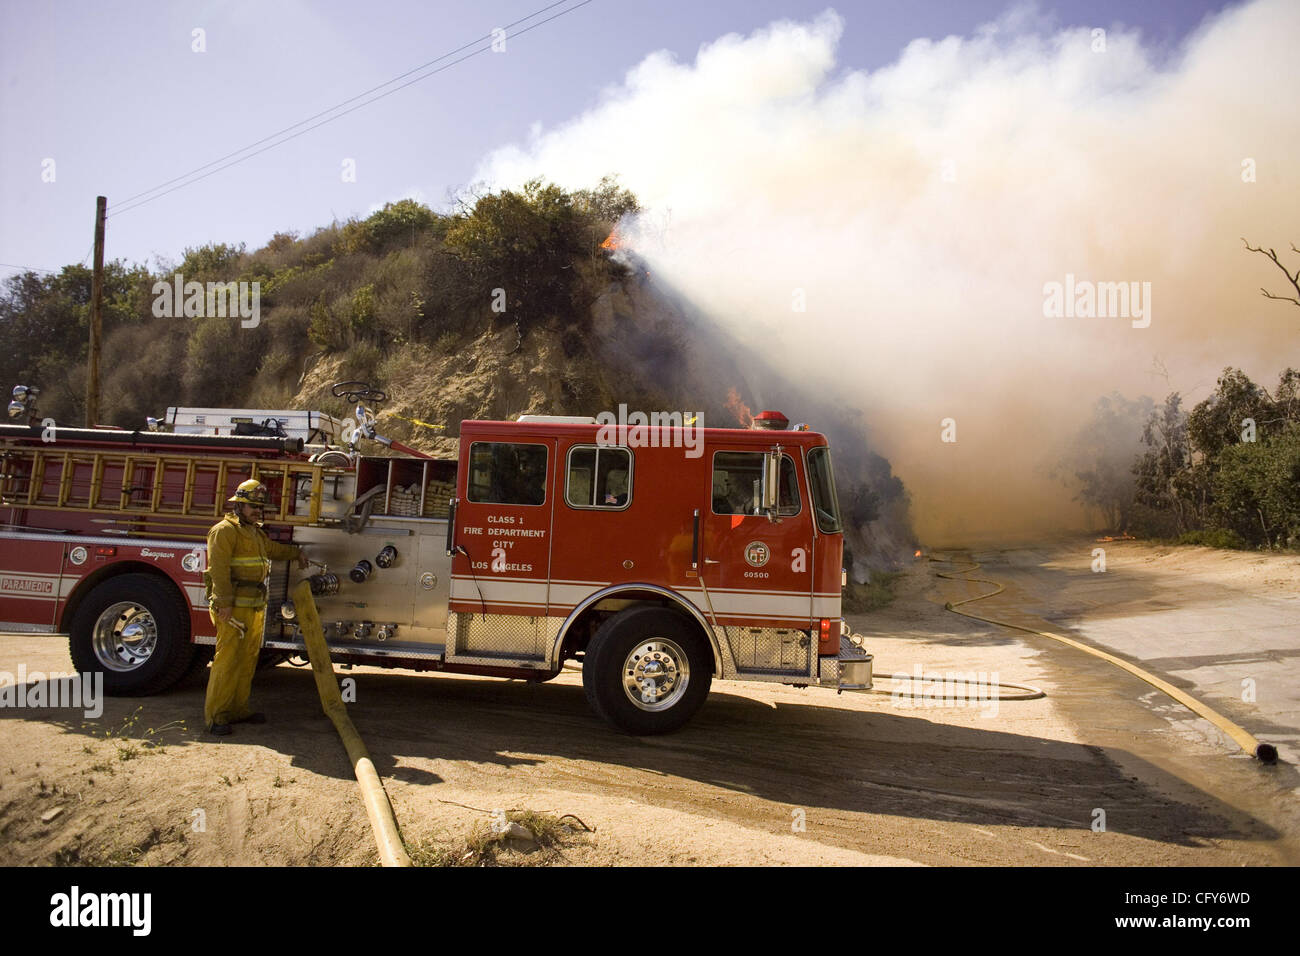 A firefighter fills his truck with water as a brush fire gets out of control in Griffith Park, Los Angeles. Authorities said the fire has scorched 600 acres of trees and brush in Los Angeles' sprawling Griffith Park Tuesday. No homes were immediately threatened, but evacuations were put into effect  Stock Photo